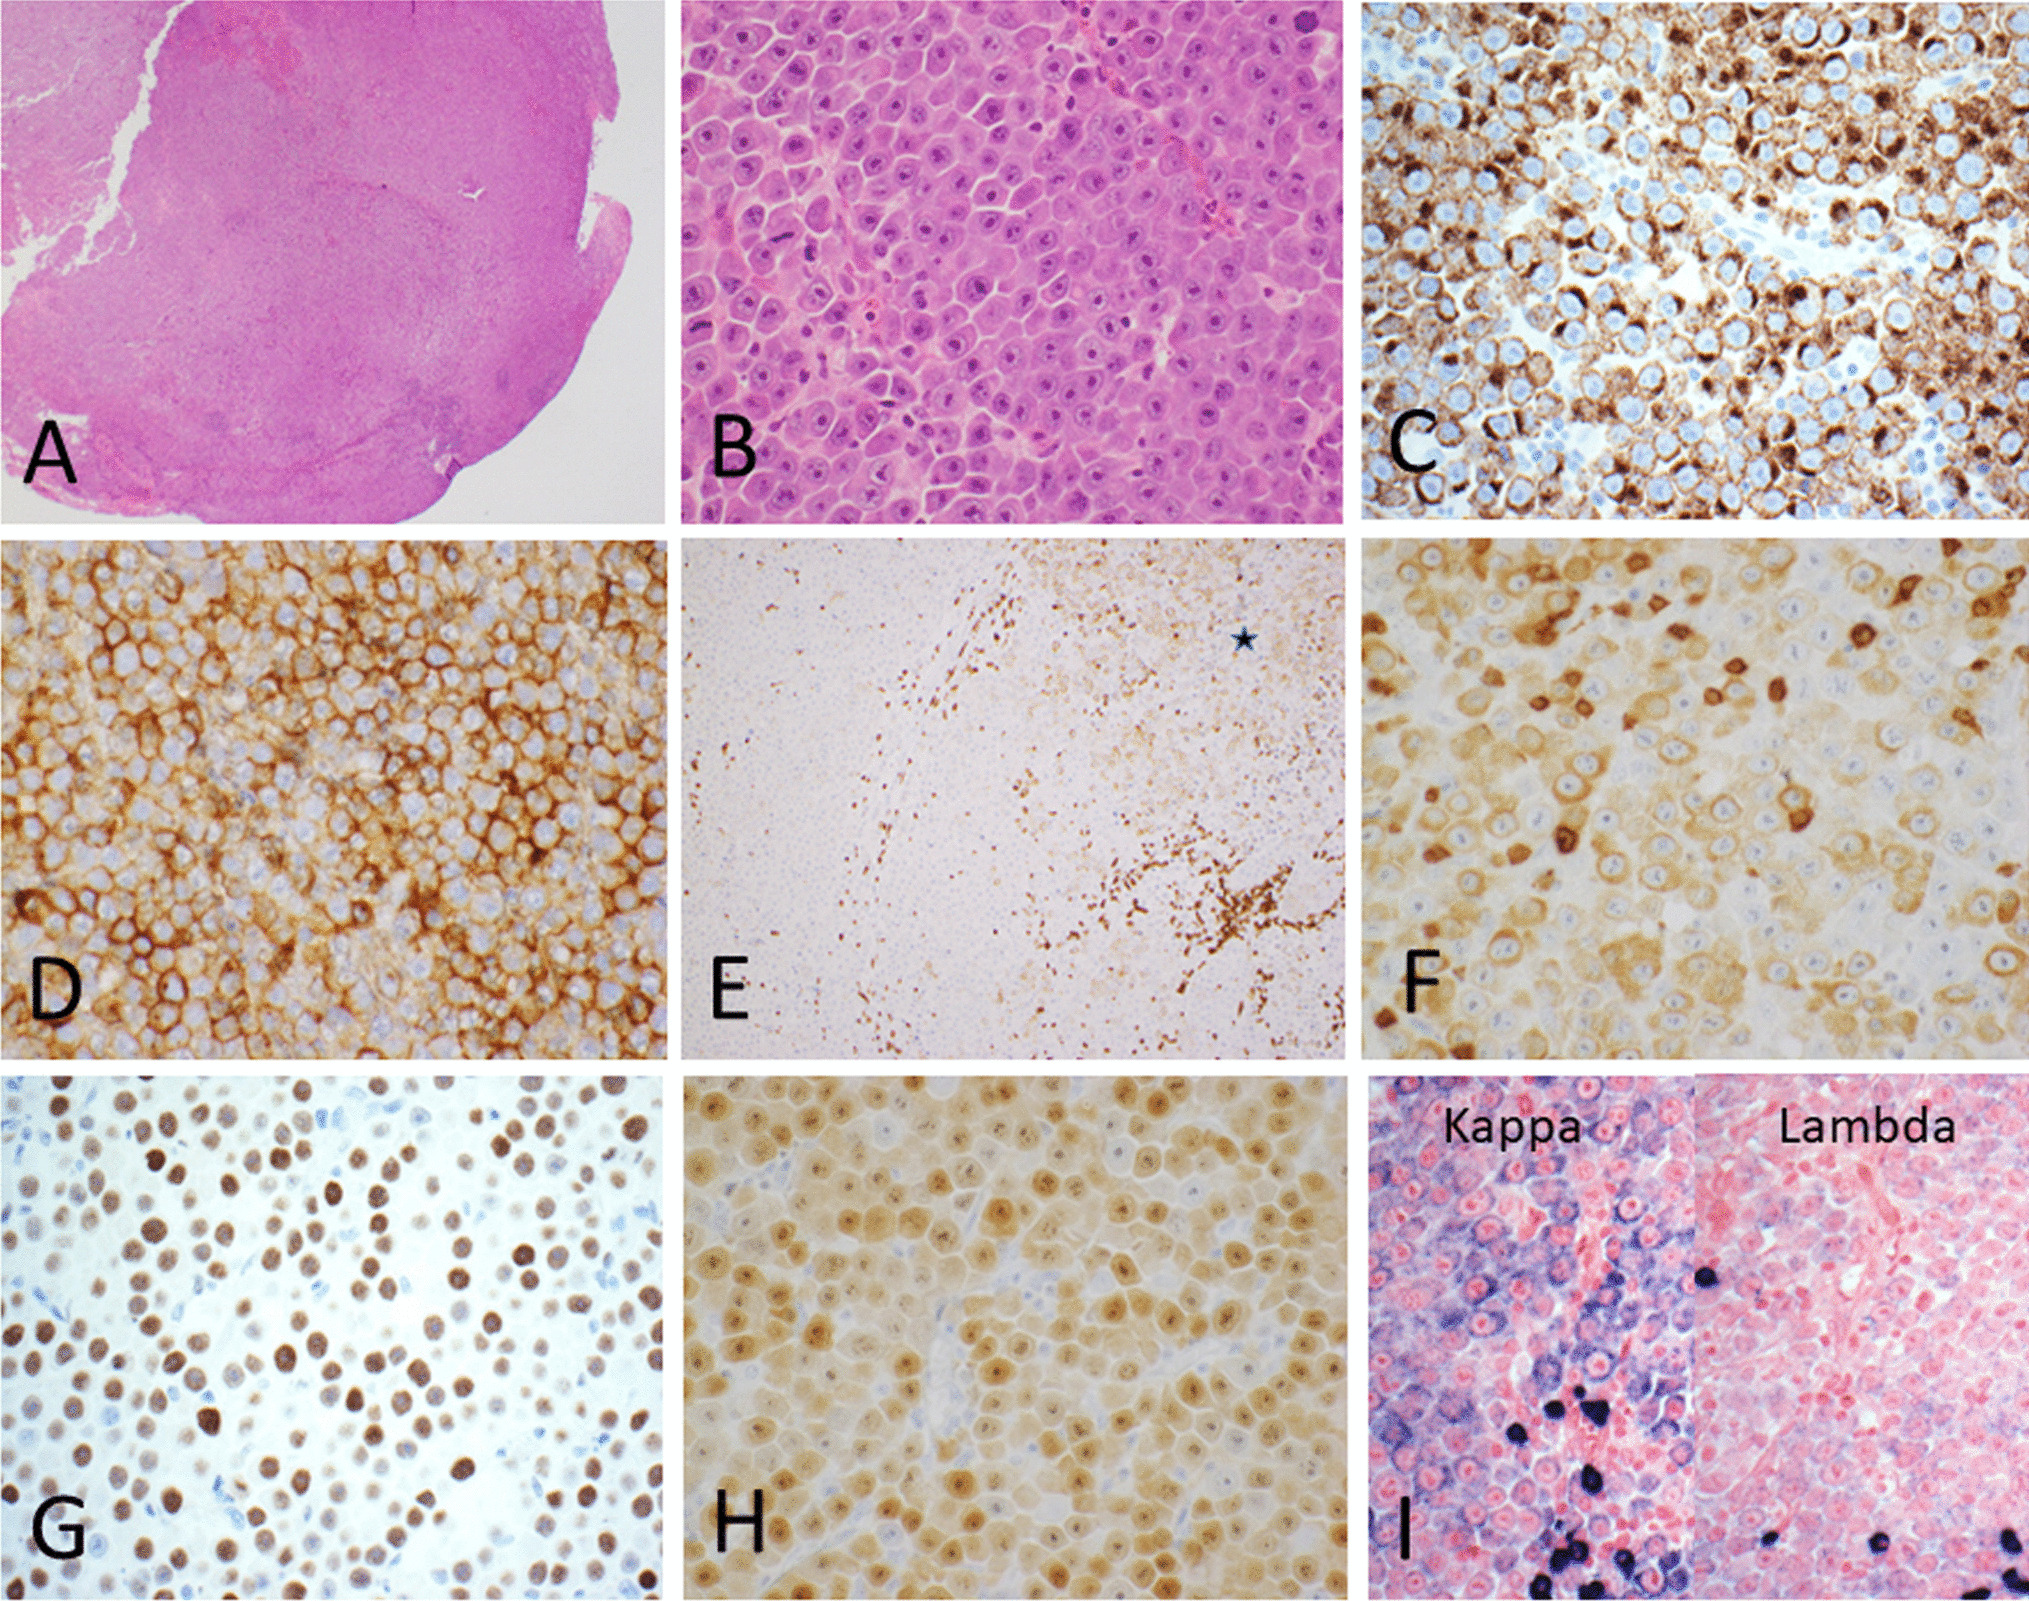 ALK-positive large B-cell lymphoma (ALK + LBCL) with aberrant CD3 expression